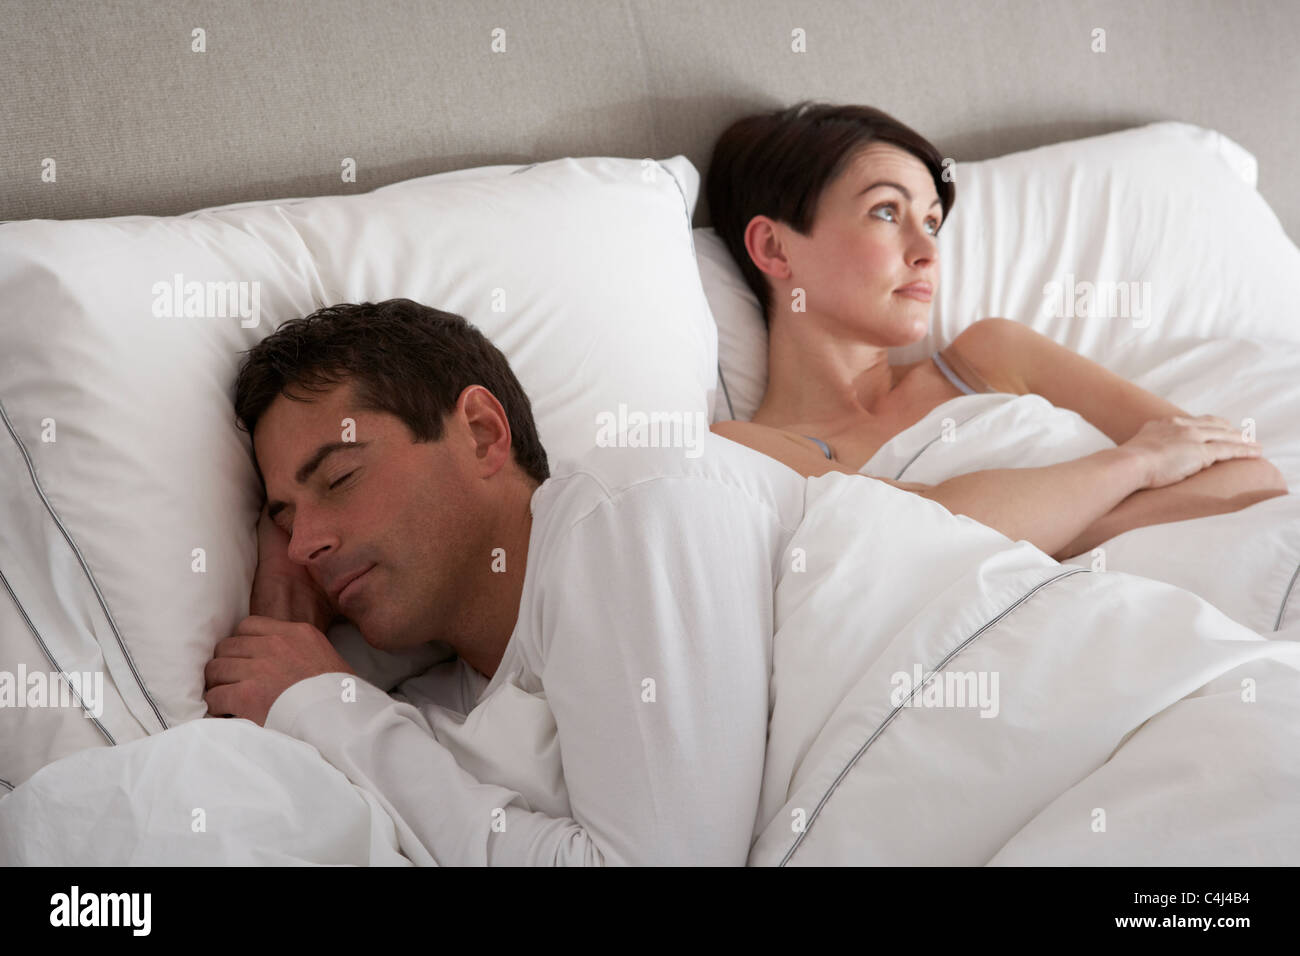 Couple With Problems Having Disagreement In Bed Stock Photo